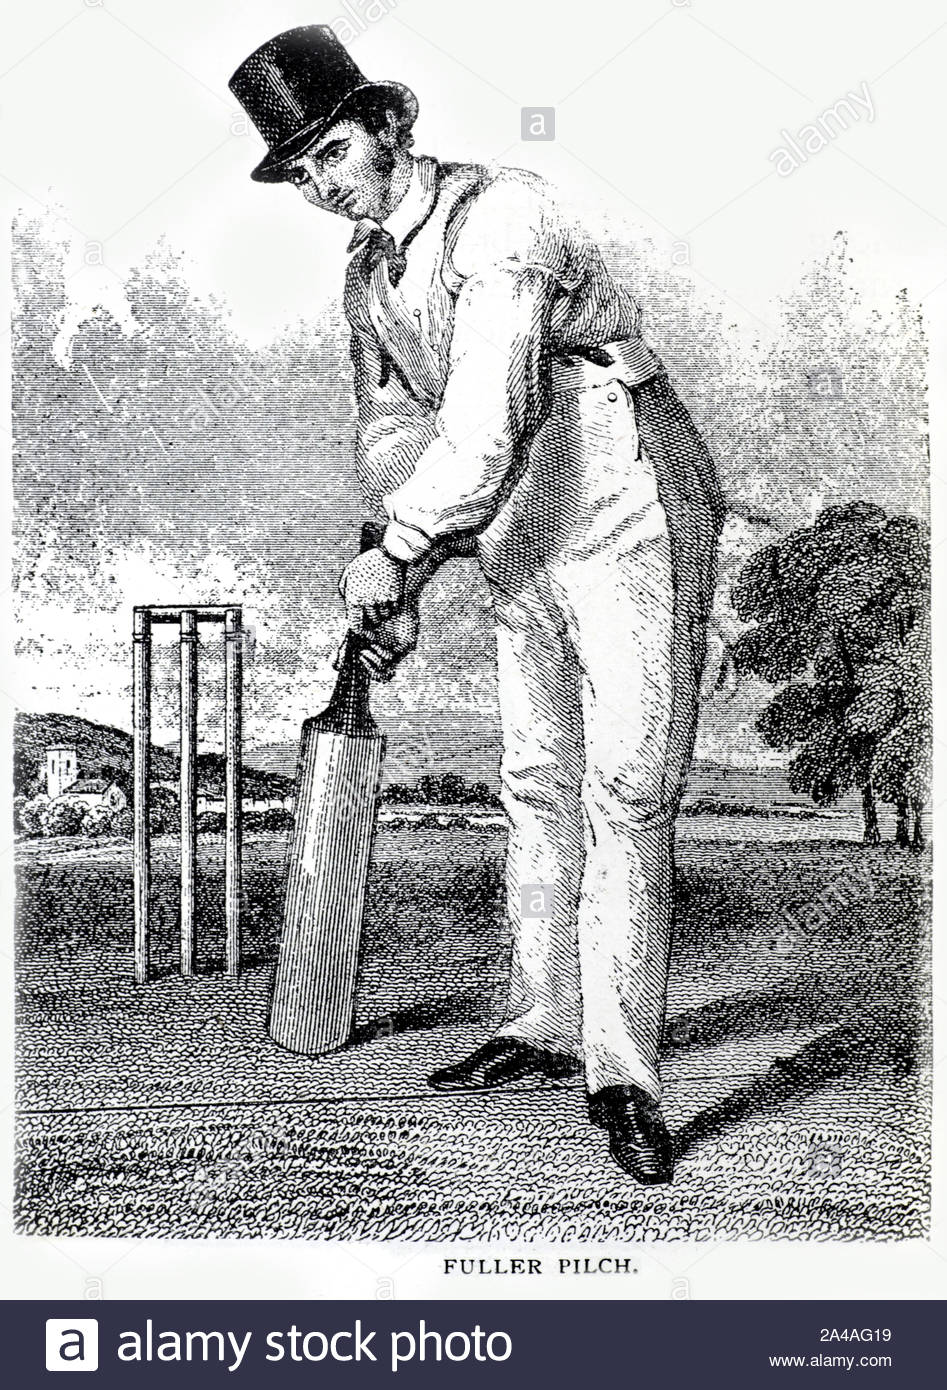 Fuller Pilch portrait, 1803 – 1870, was an English first class cricketer, considered the greatest batsmen of his era, illustration from 1800s Stock Photo